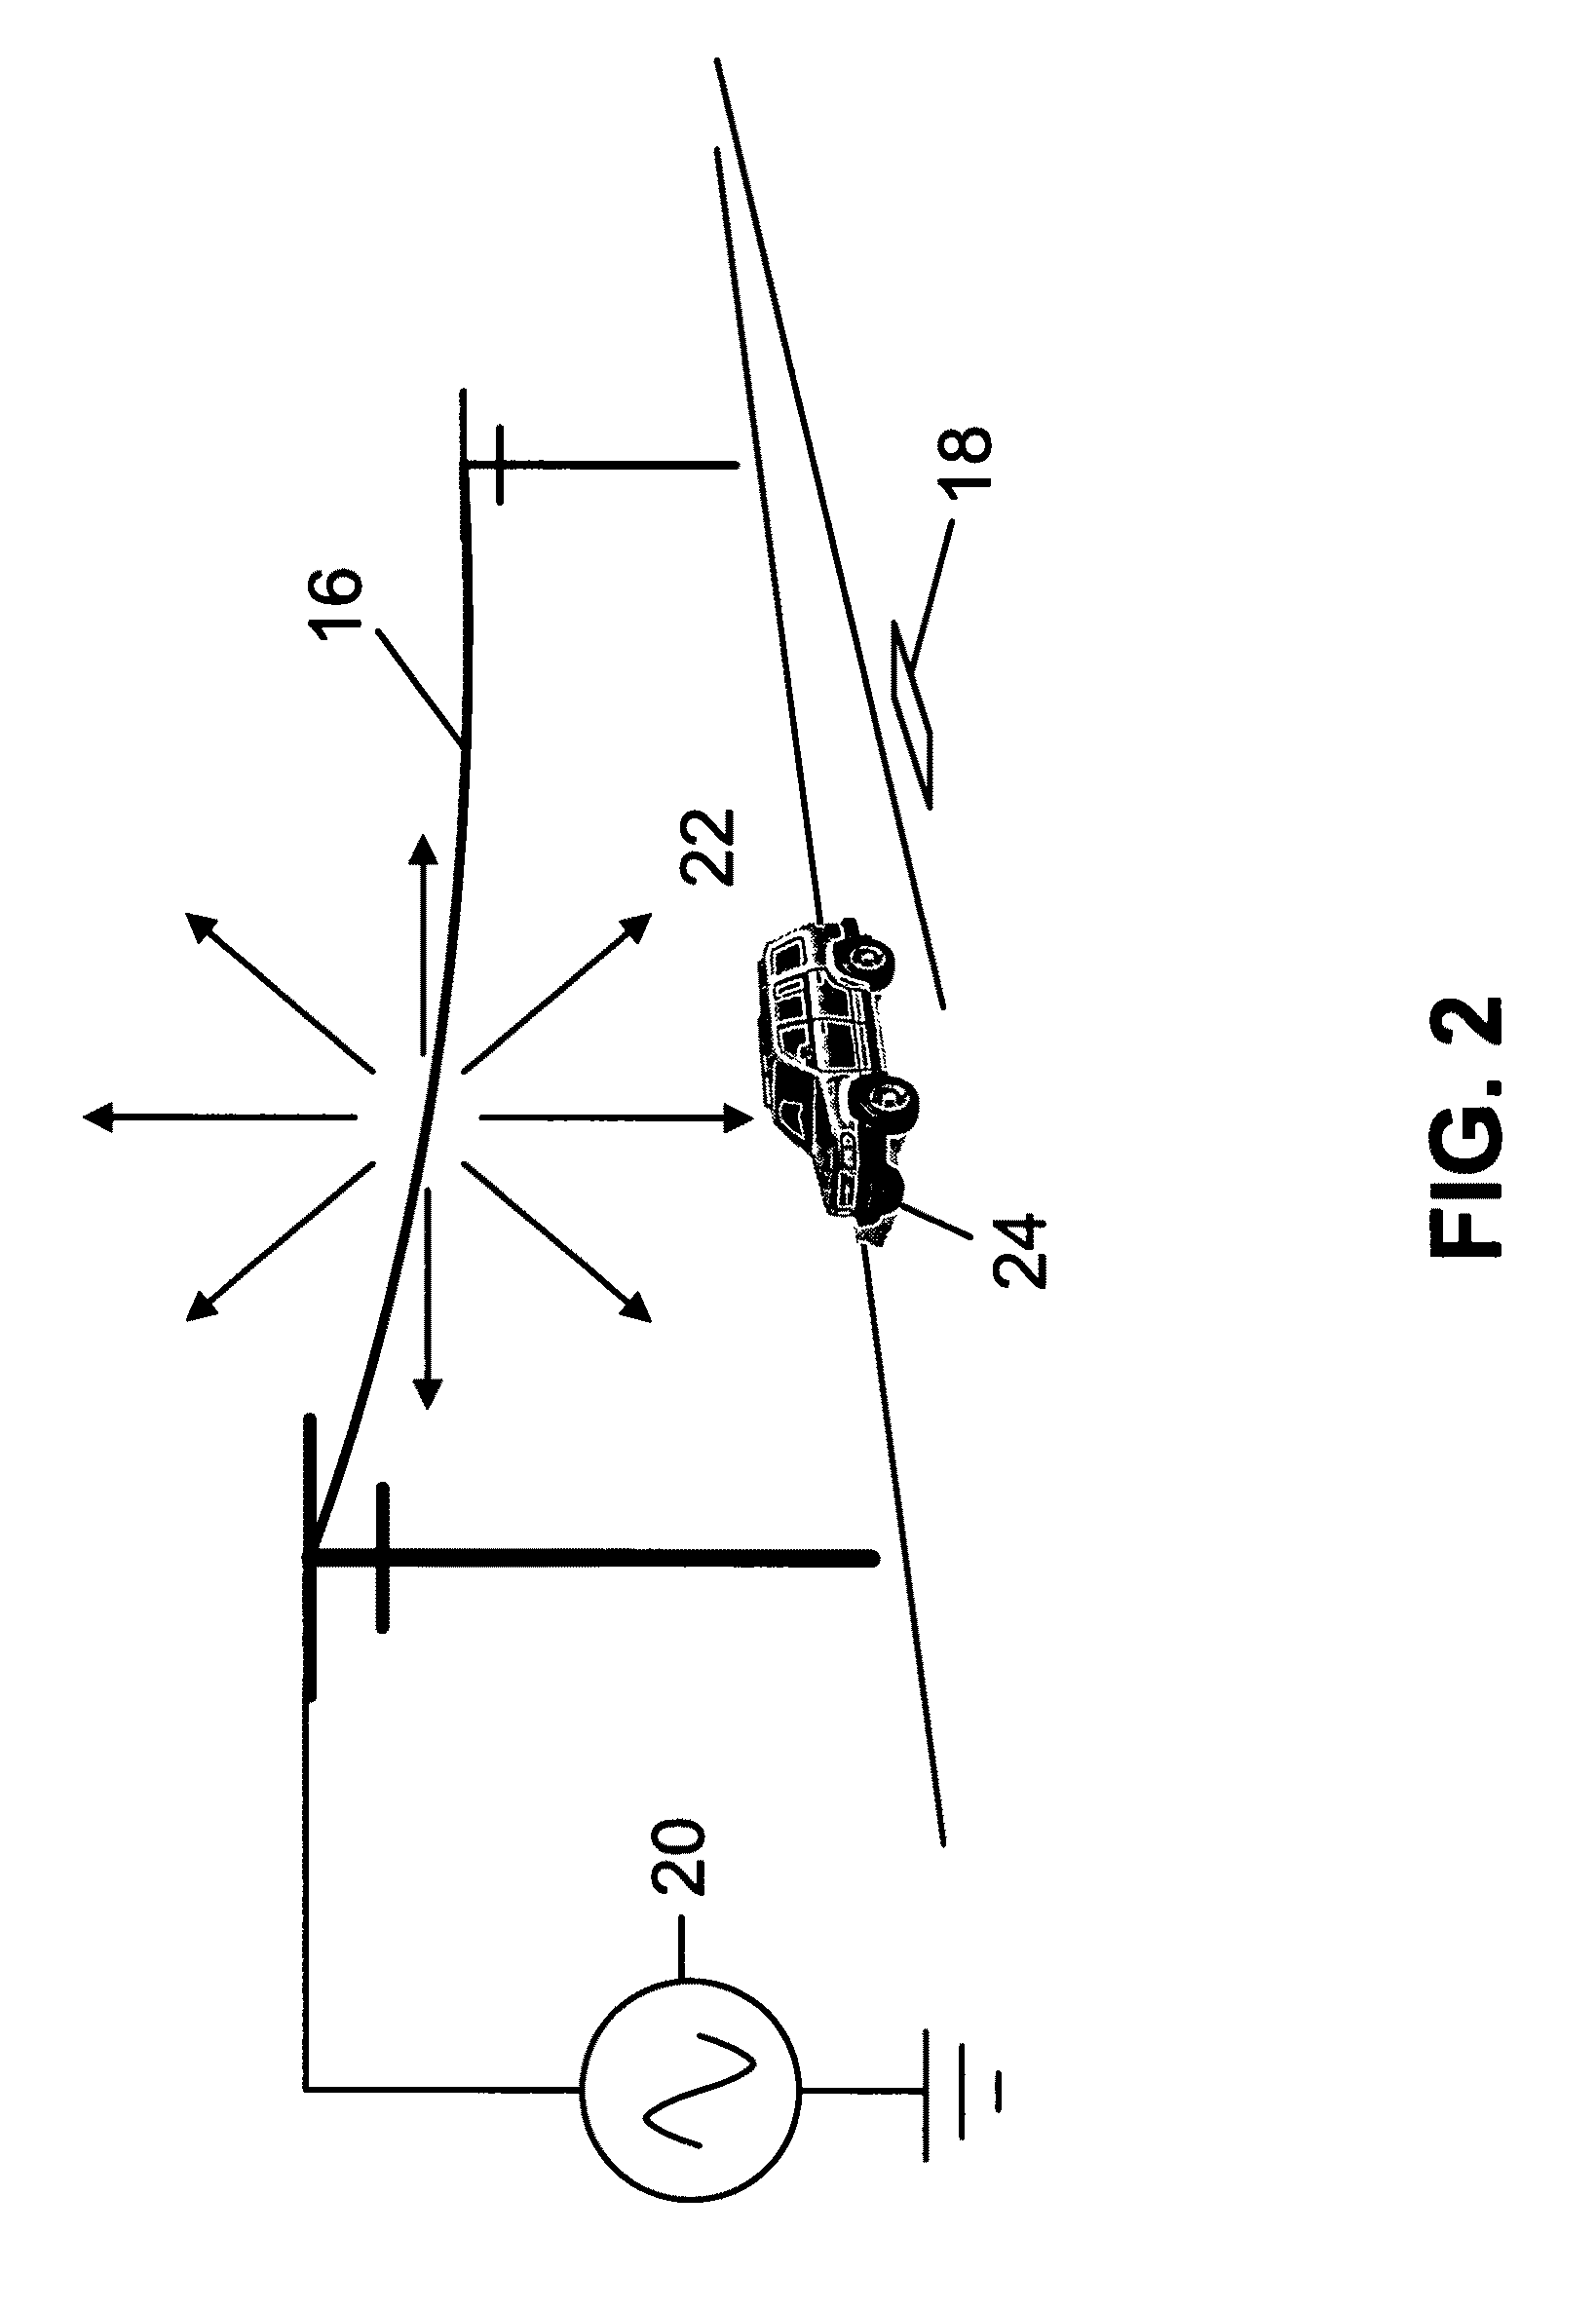 Methods of detecting anomalies in ambient alternating current fields